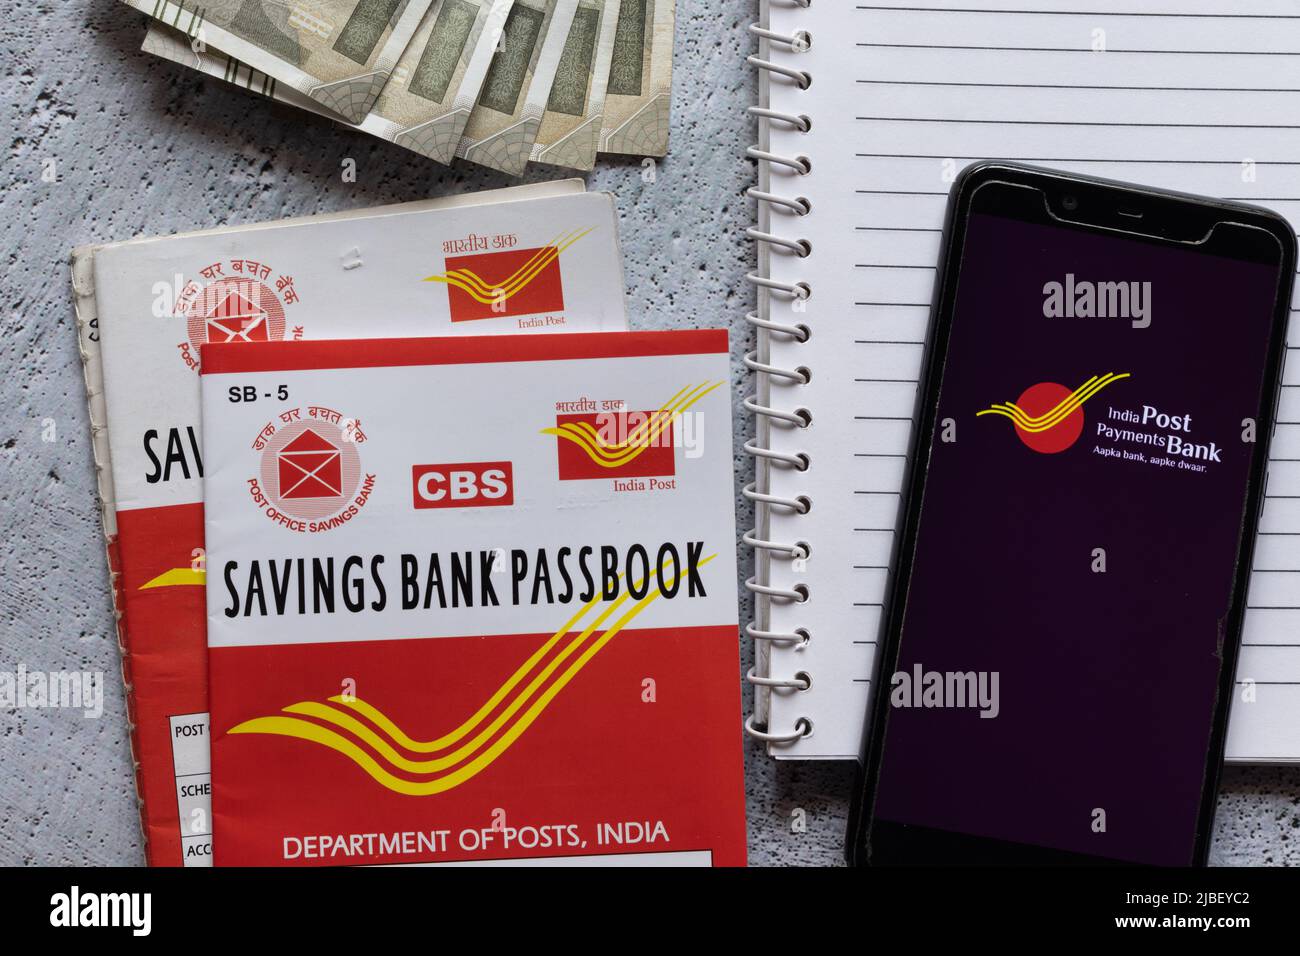 Birbhum, West Bengal, India - 25 April 2022: Top view of Indian post office savings books, currencies and smart phone with IPPB application Stock Photo